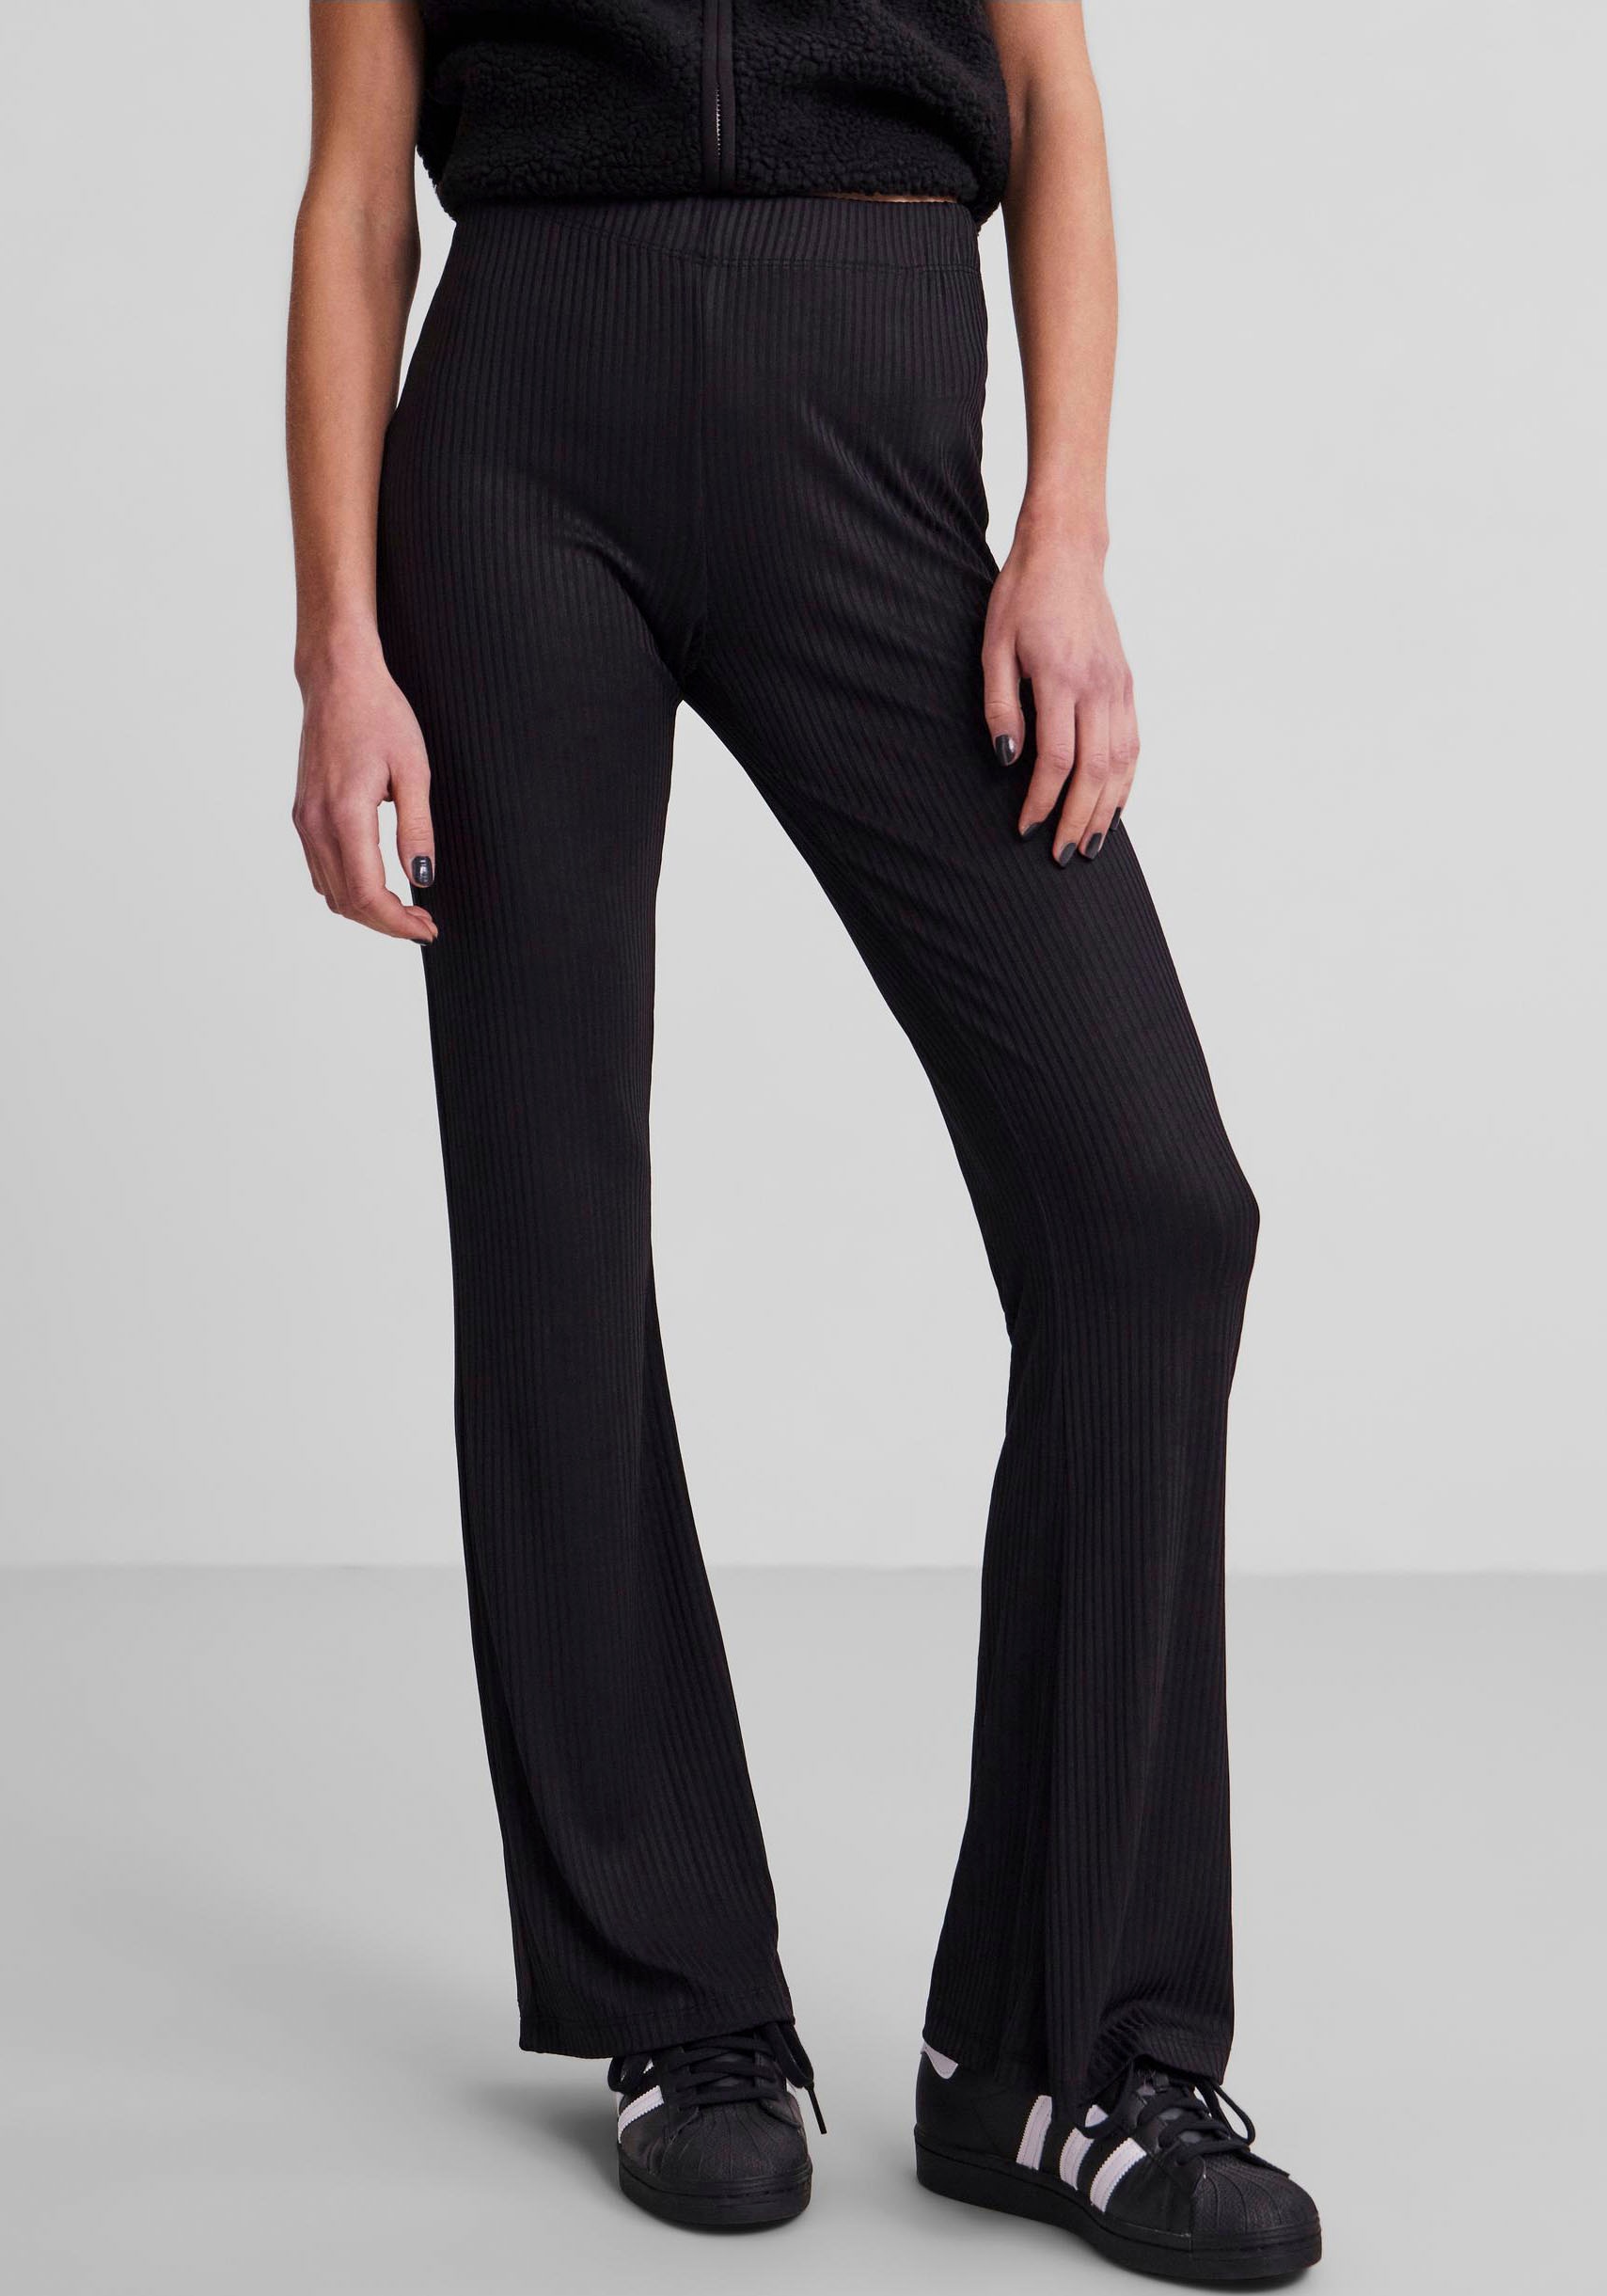 pieces Bootcuthose »PCTOPPY MW FLARED PANT NOOS«, Flared Style von Pieces